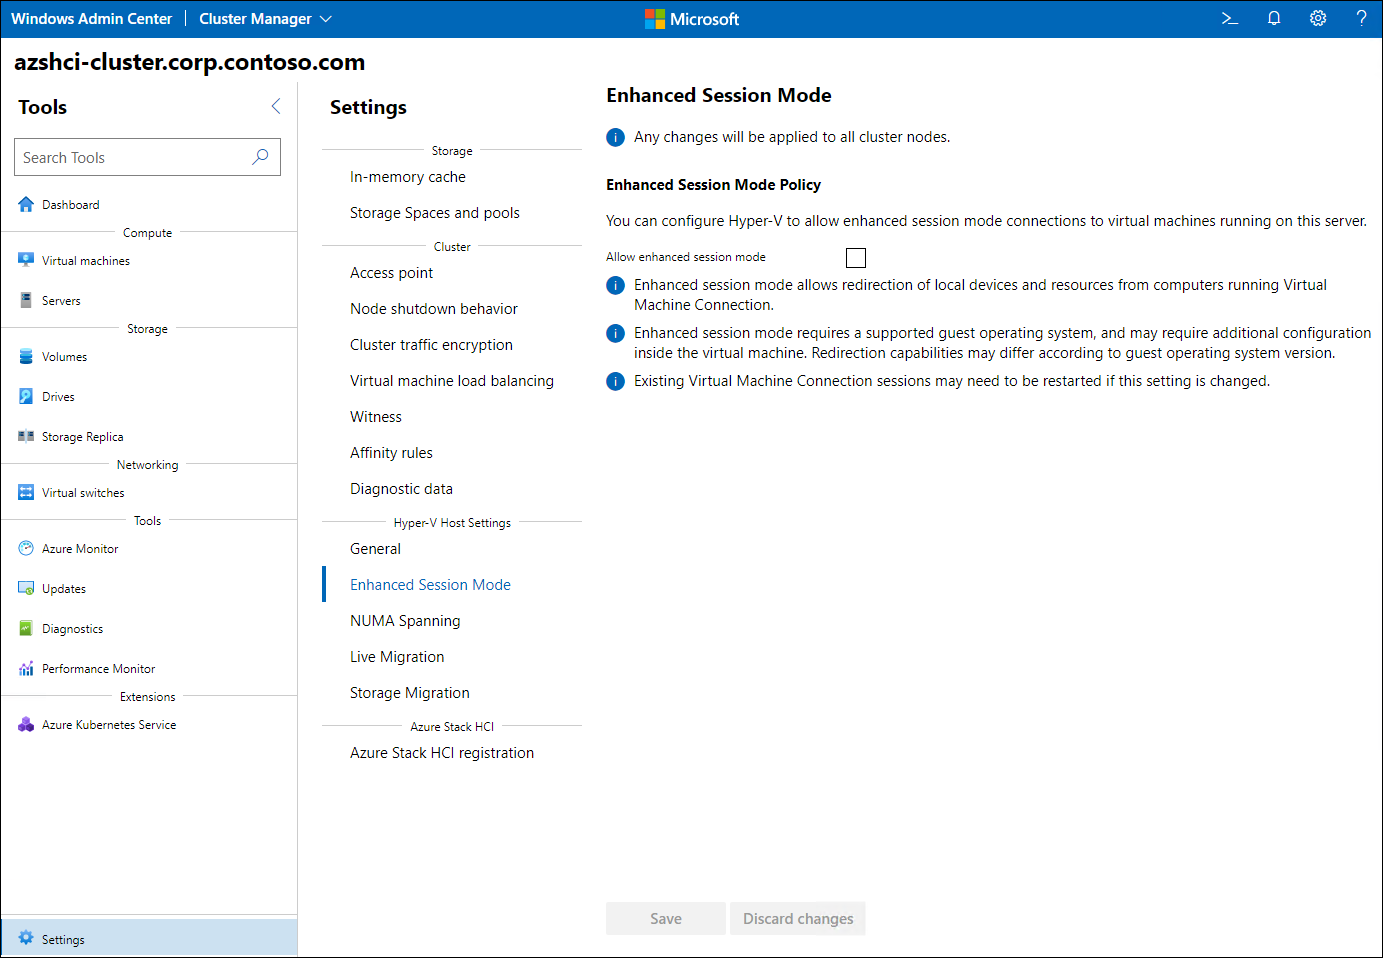 The screenshot depicts the Enhanced Session Mode settings for clustered VMs.